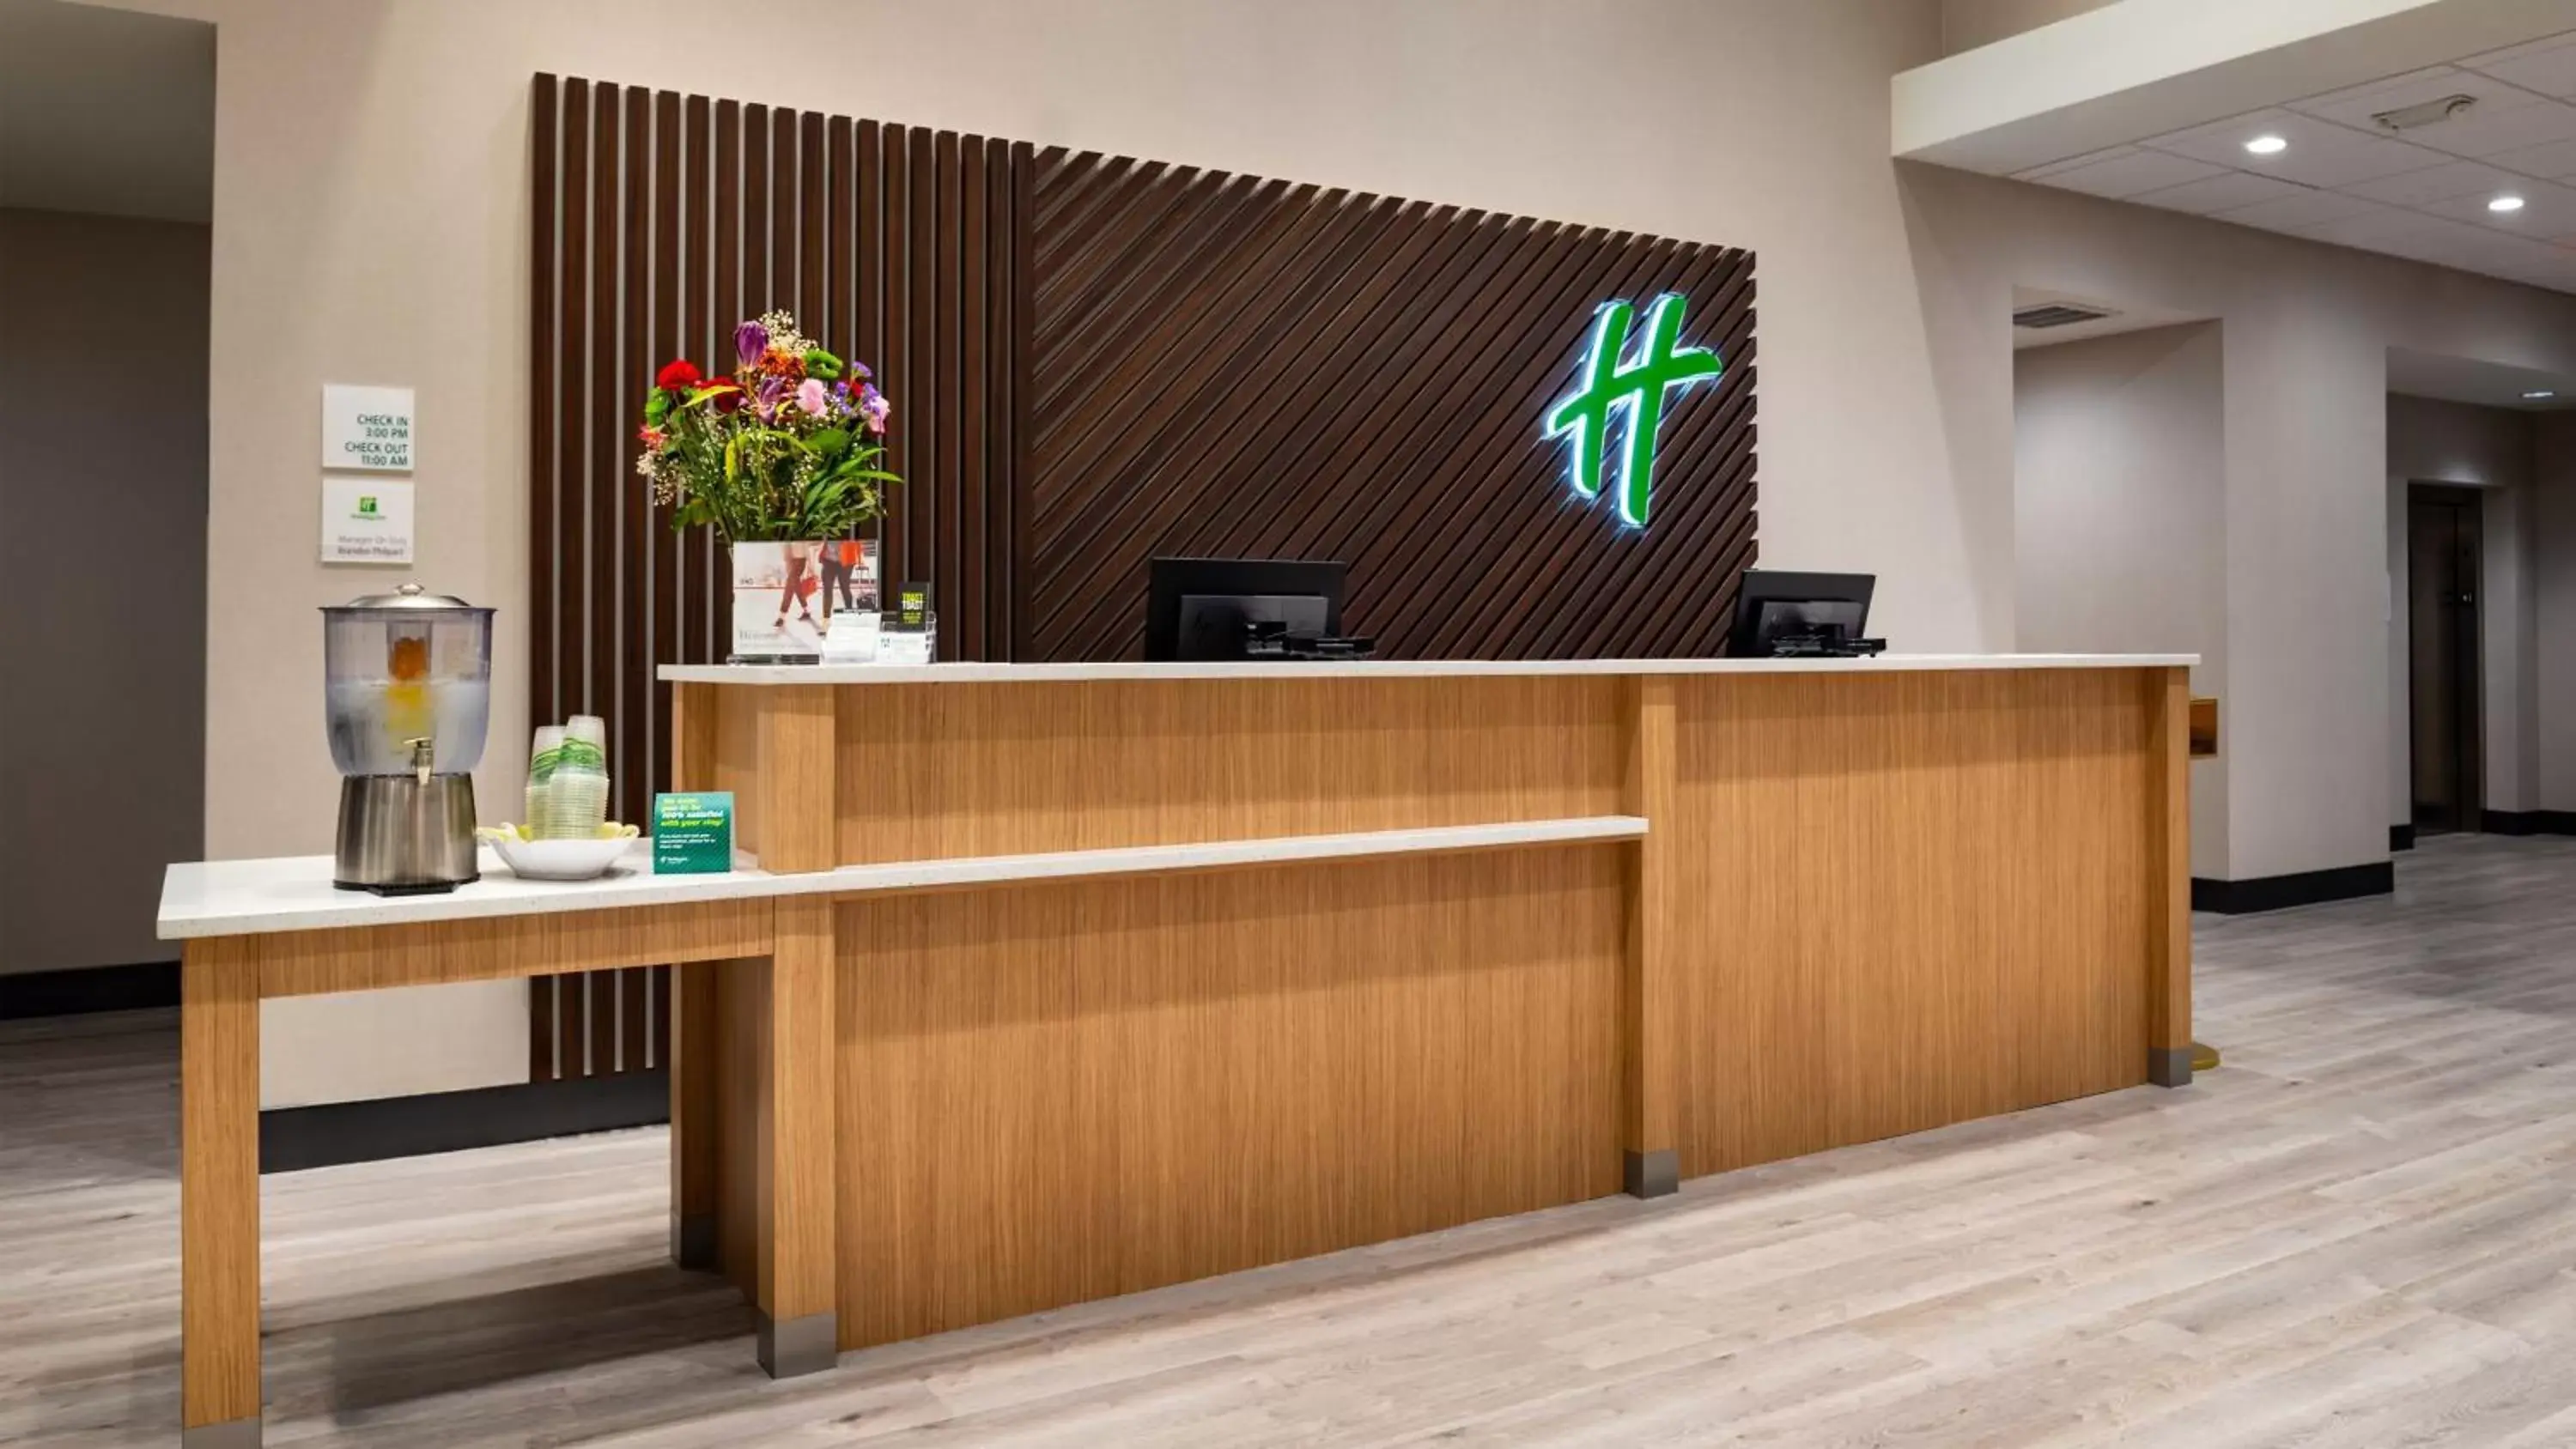 Property building, Lobby/Reception in Holiday Inn & Suites Orlando - International Dr S, an IHG Hotel